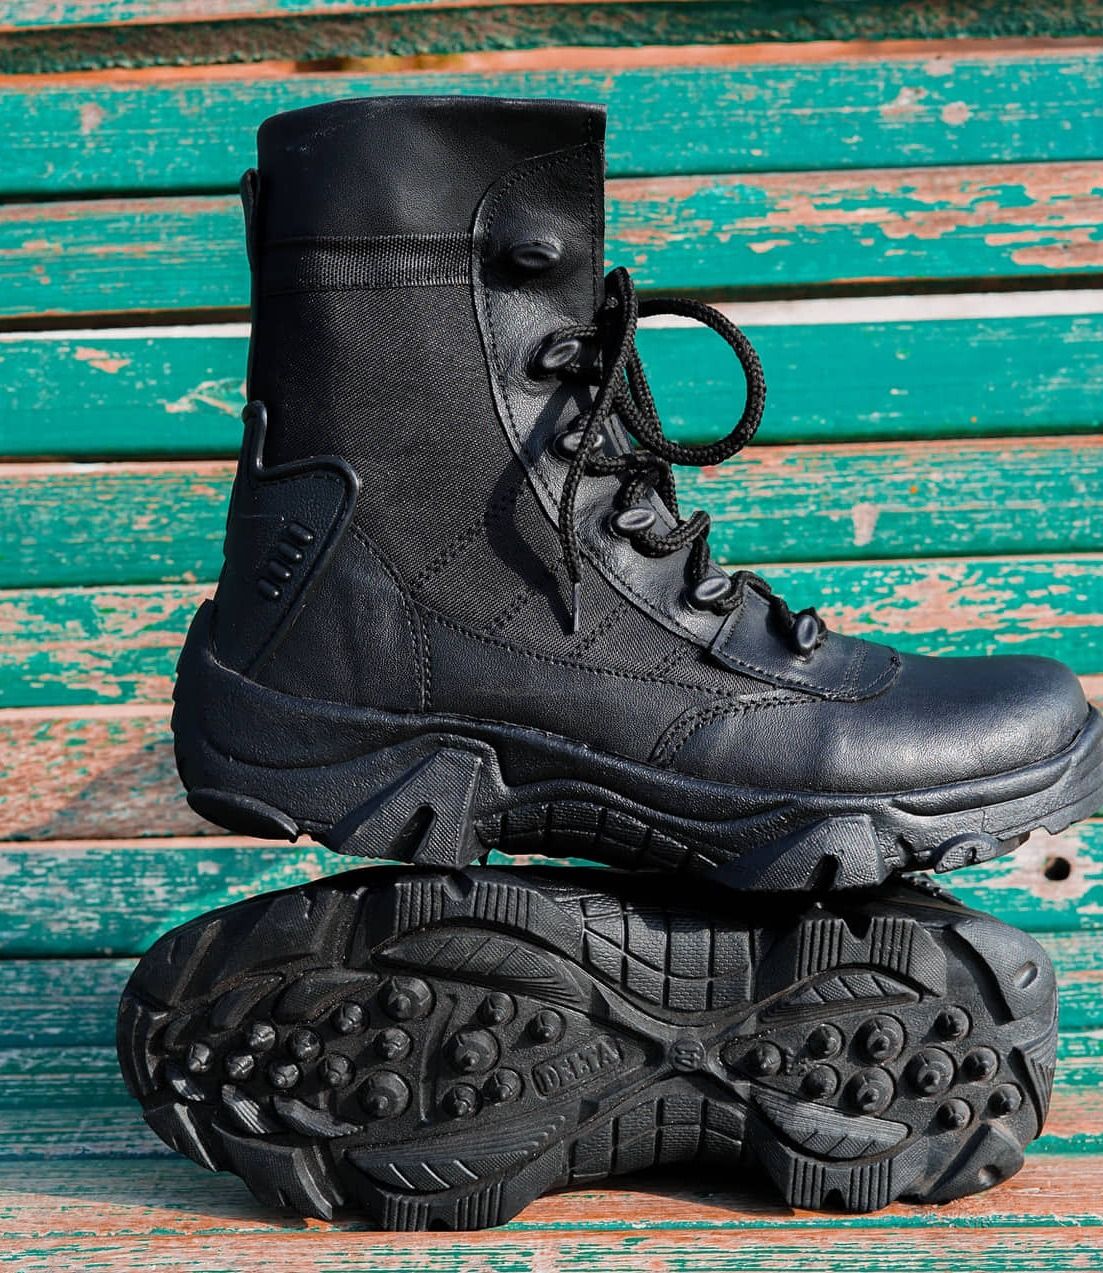 New commando delta shoes ankle long Army boots